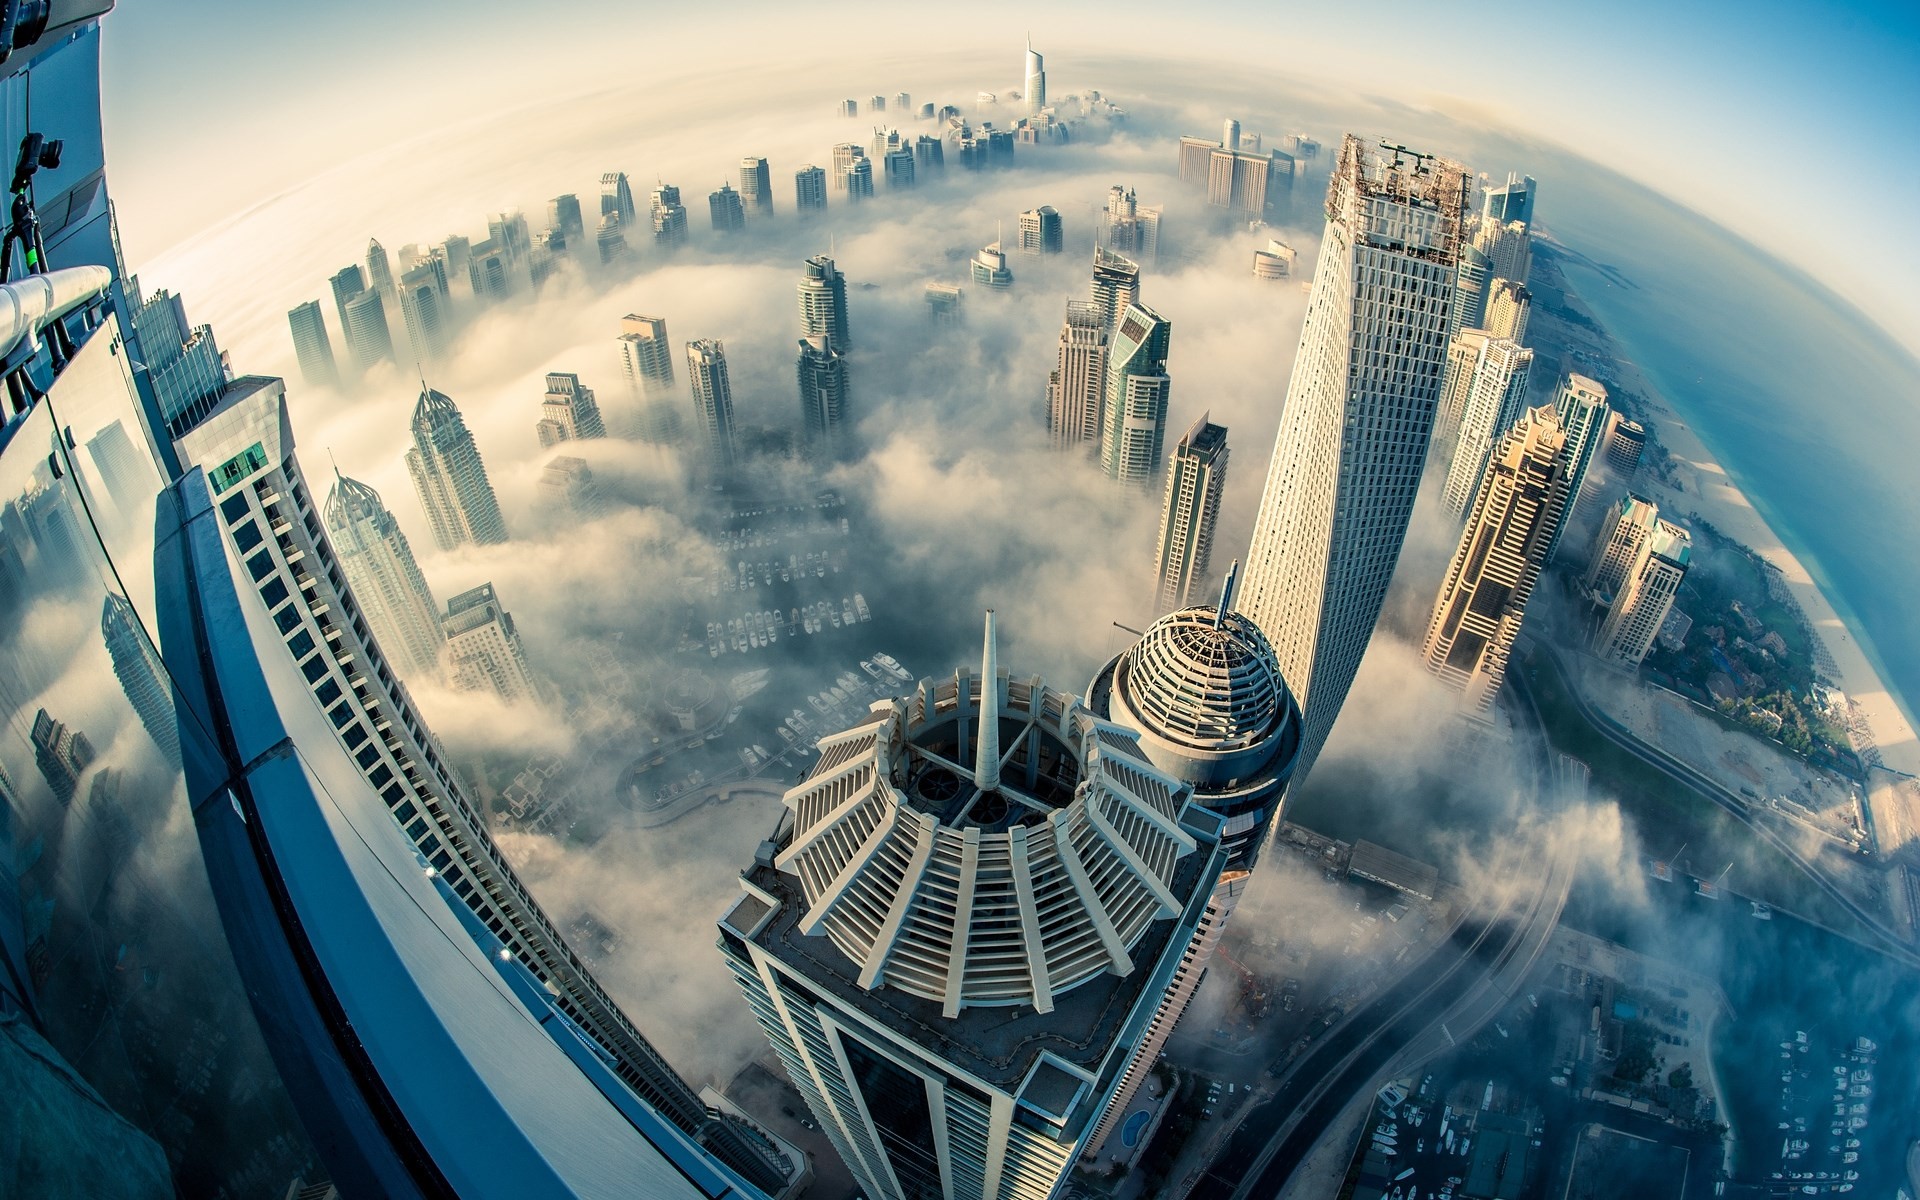 Photo of foggy Dubai from the window of a high-rise building